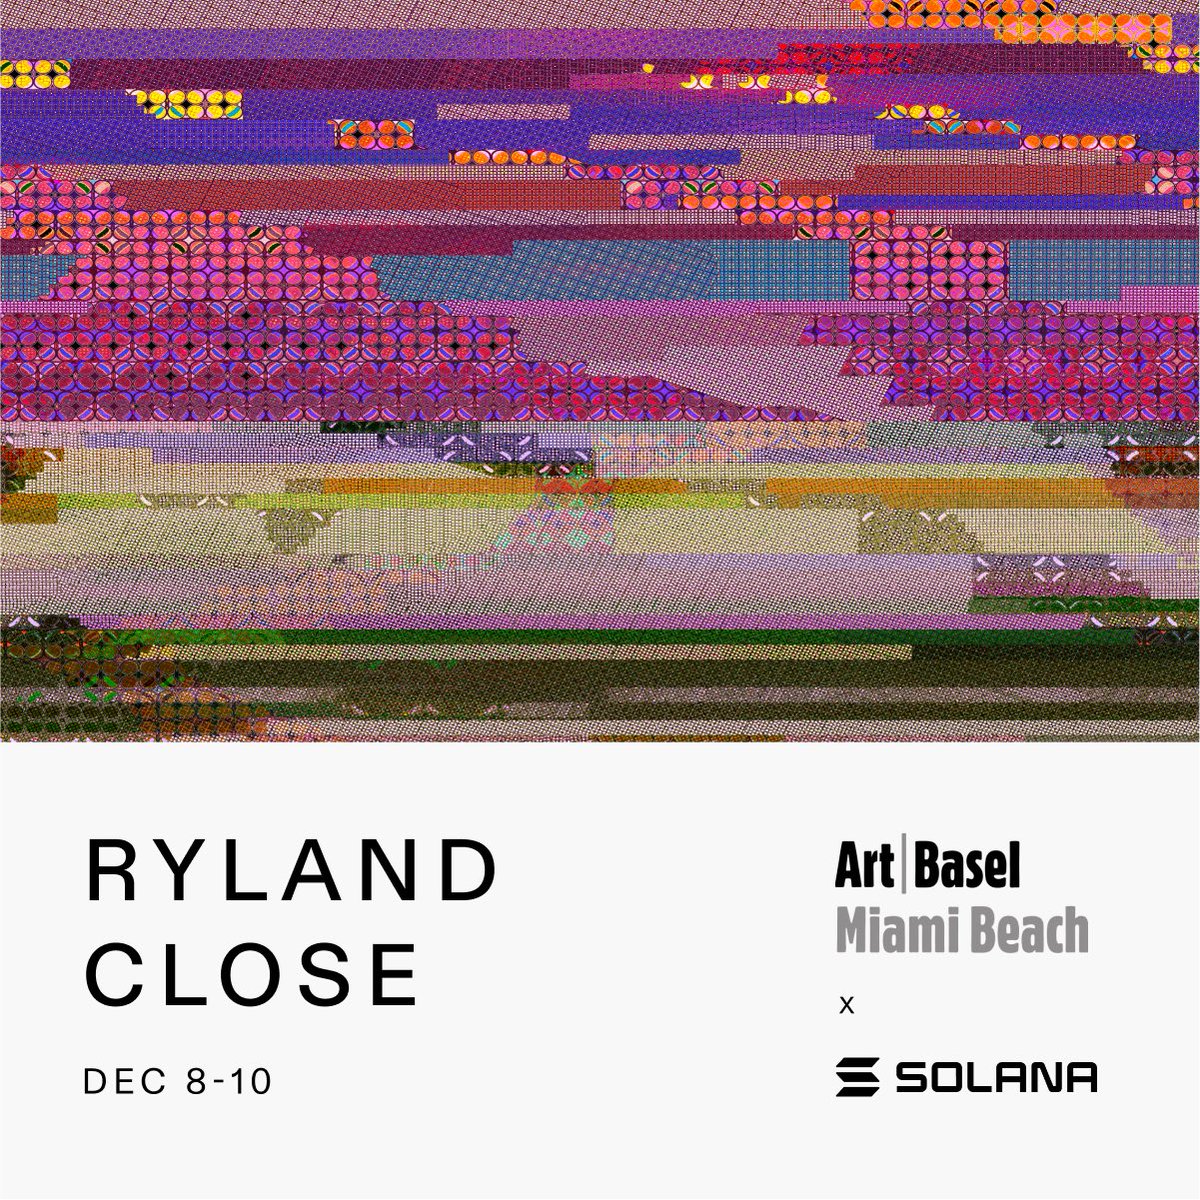 GM — I’m thrilled to announce that my art will be exhibited at @ArtBasel Miami Beach alongside other talented friends. The event is open to the public December 8-10 and you can find my work featured in the @Solana footprint. solana.com/art-basel #artbaselmiamibeach